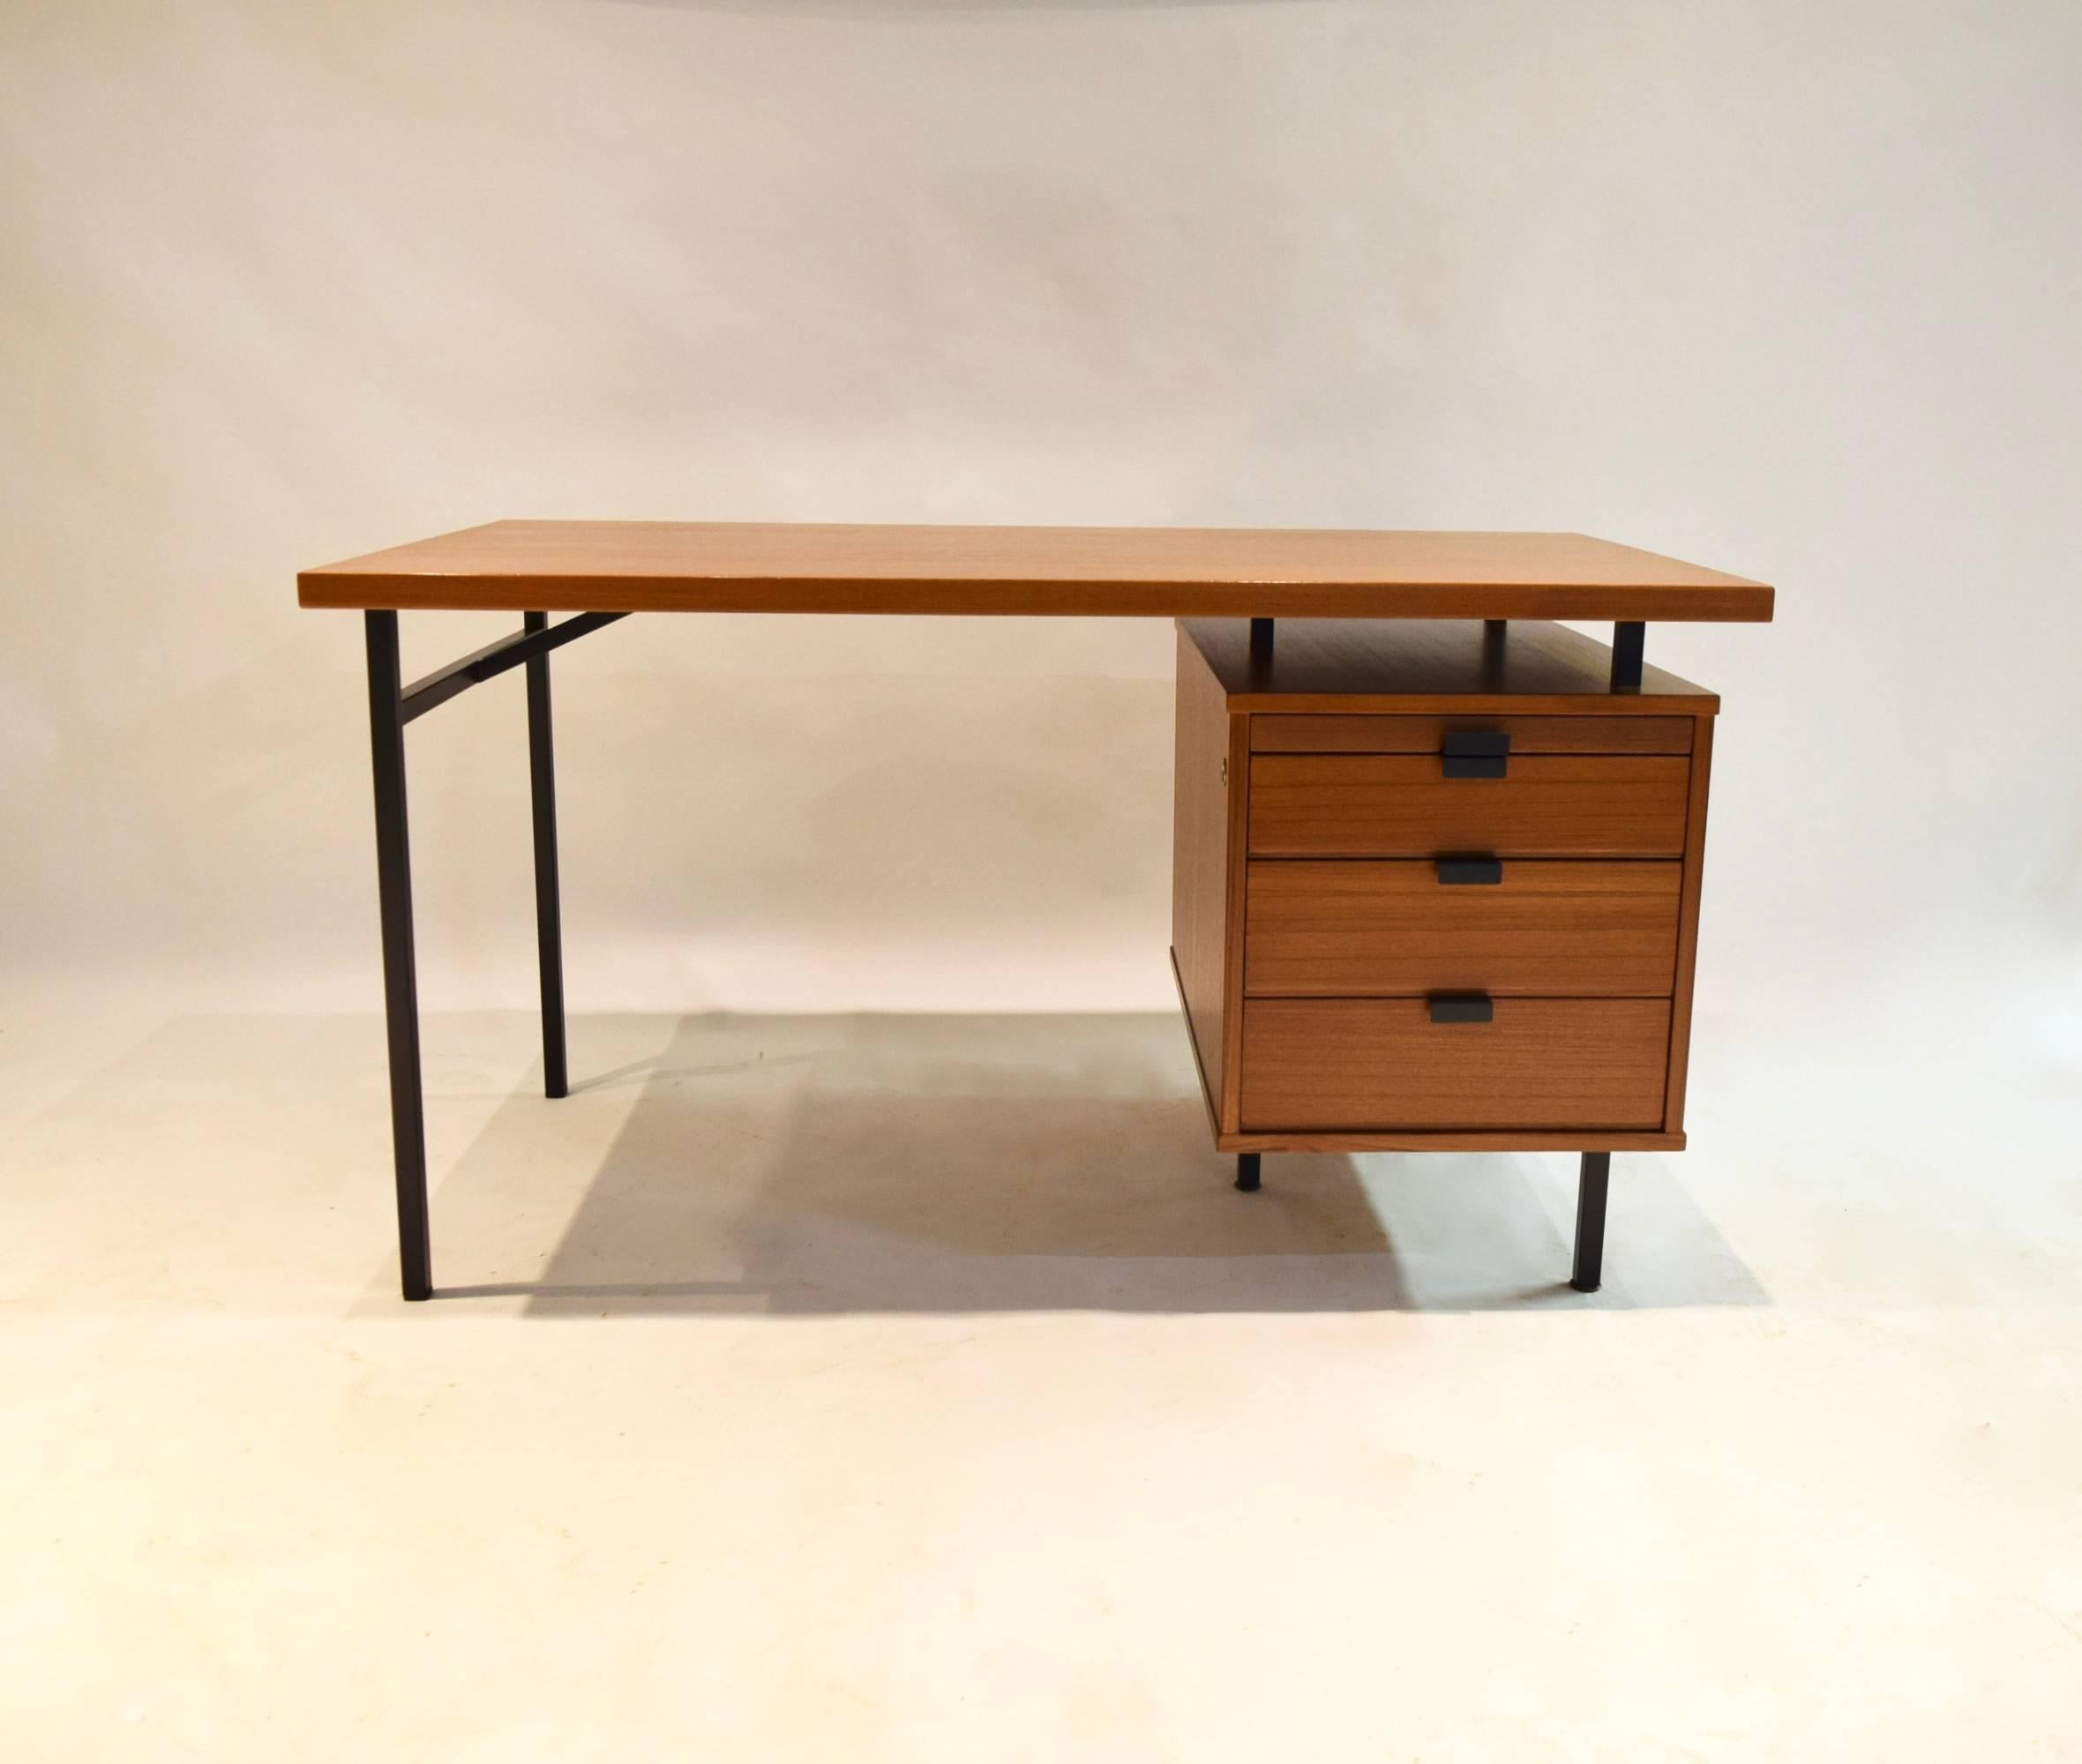 Desk with four pull-out drawers, a black enameled steel frame with matching pulls, and 1.5